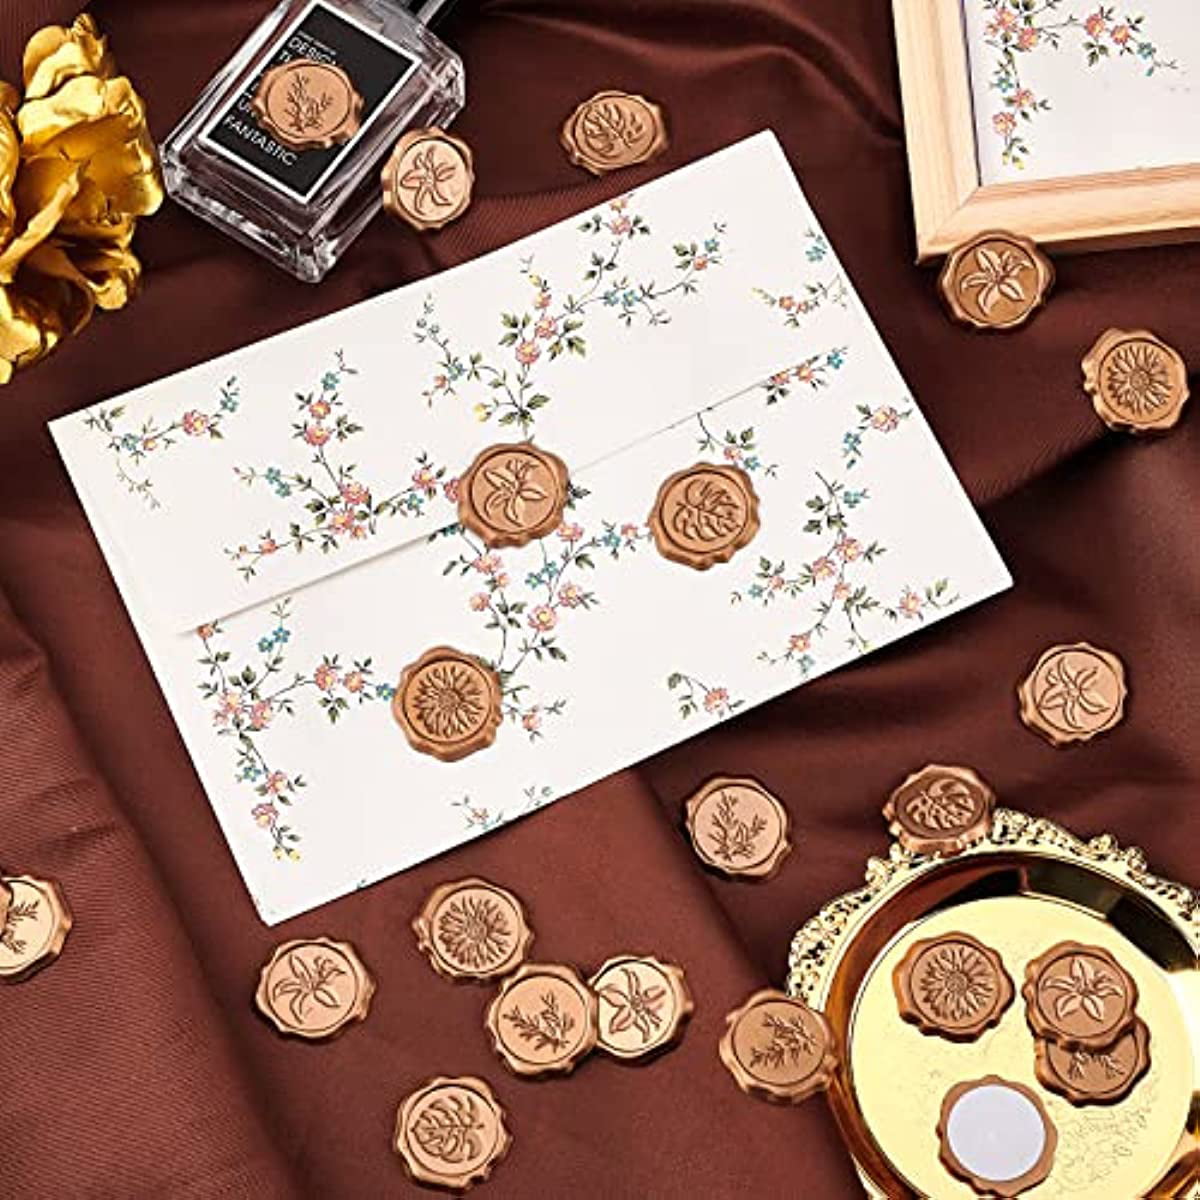 UNIQOOO Wax Seal Stickers - Botanical Plant Wedding Invitation Envelope  Seal Stickers, 100 Pcs Self- Adhesive Antique Gold Stickers, Perfect for